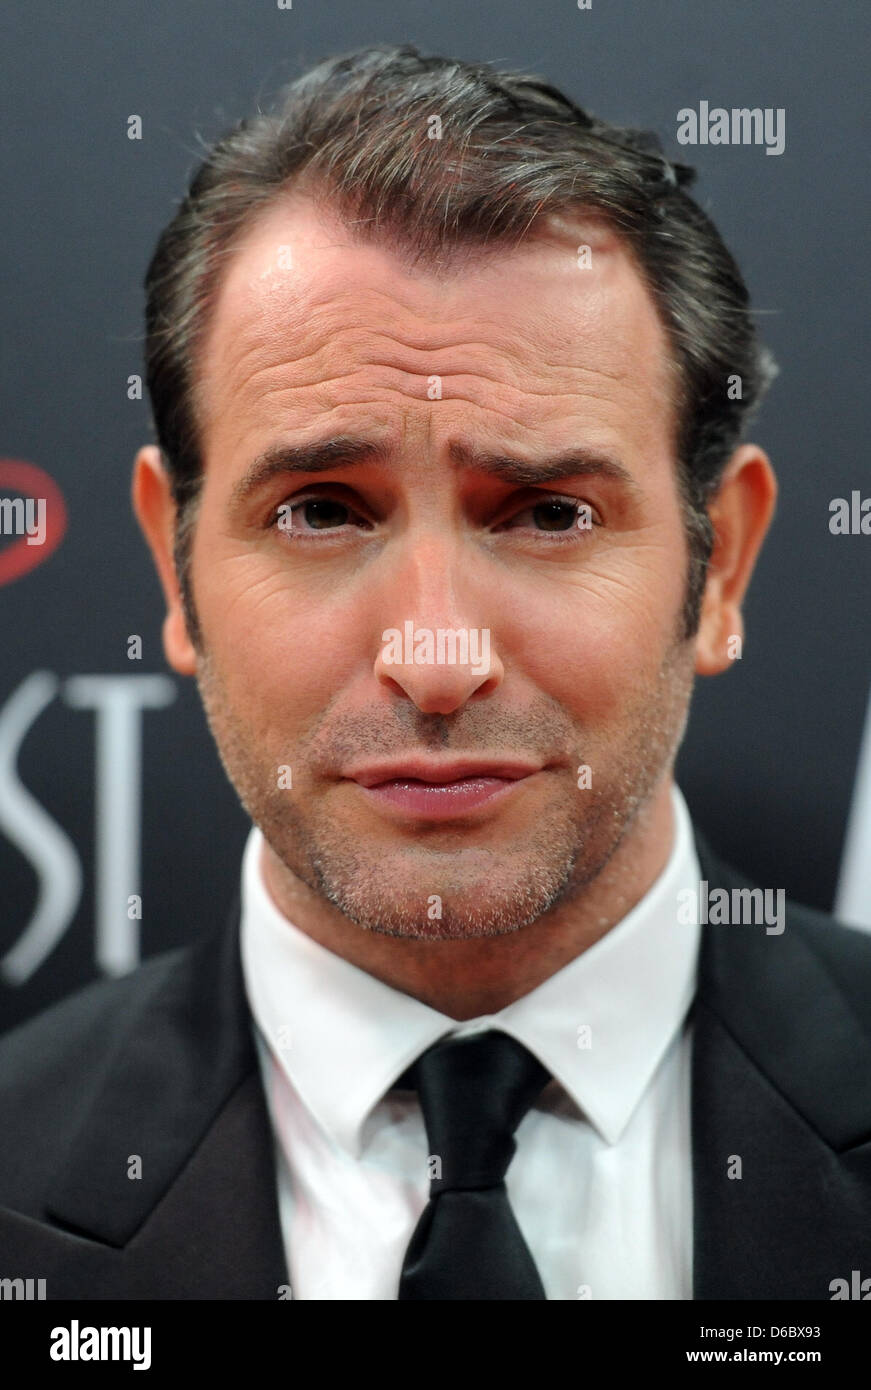 French actor Jean Dujardin poses on the red carpet at the Delphi Film  Palace on the occasion of the German premiere of the movie 'The Artist' in  Berlin, Germany, 03 January 2012.